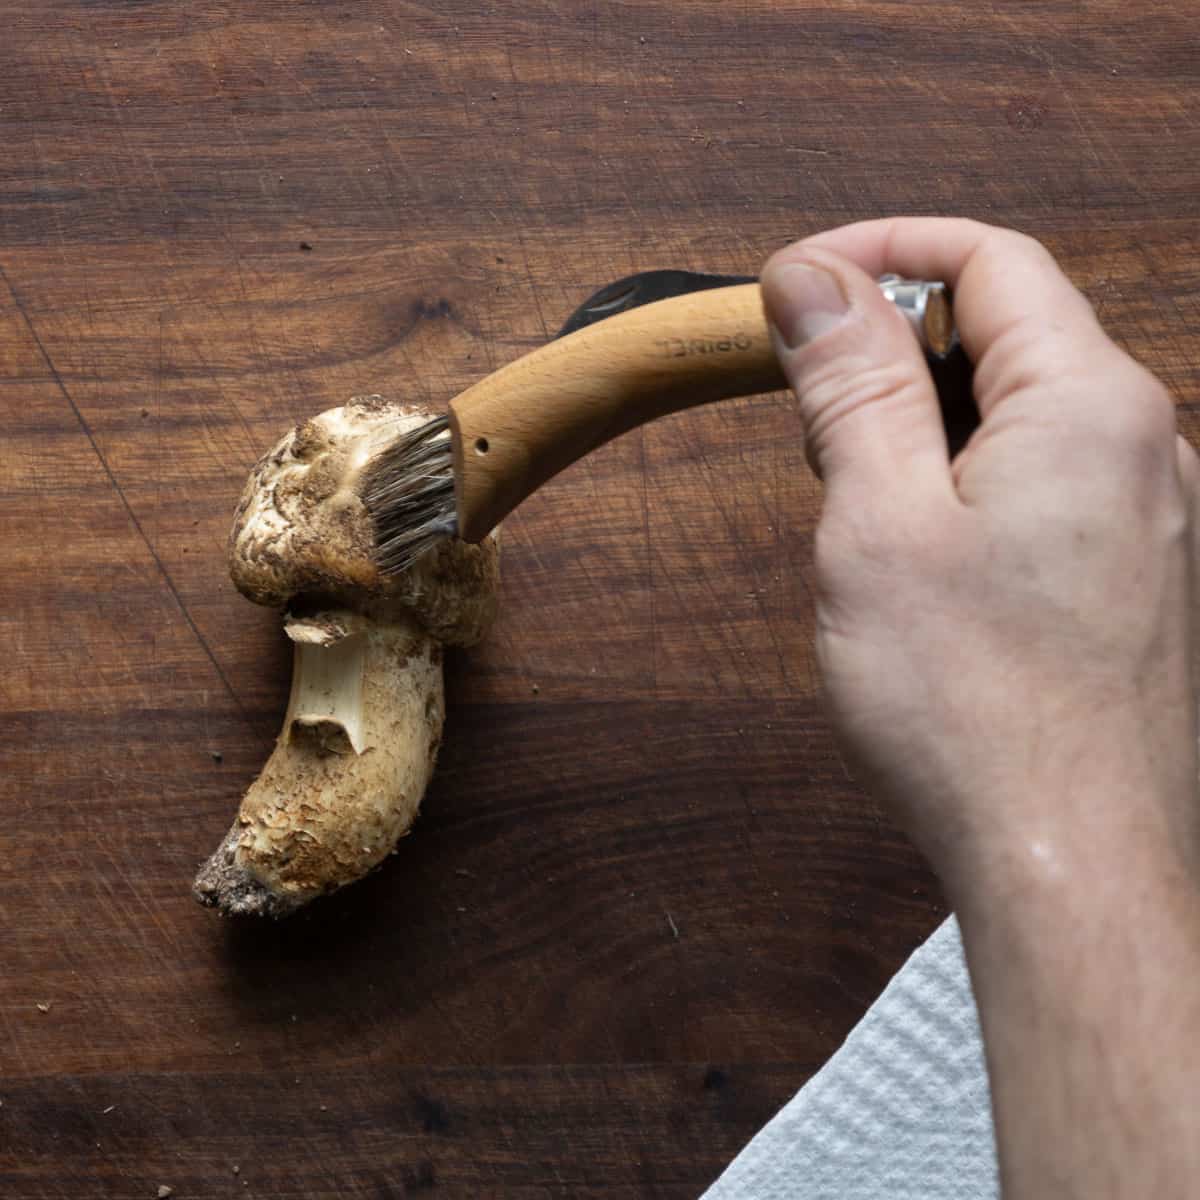 Cleaning matsutake pine mushrooms with a brush to remove sand. 